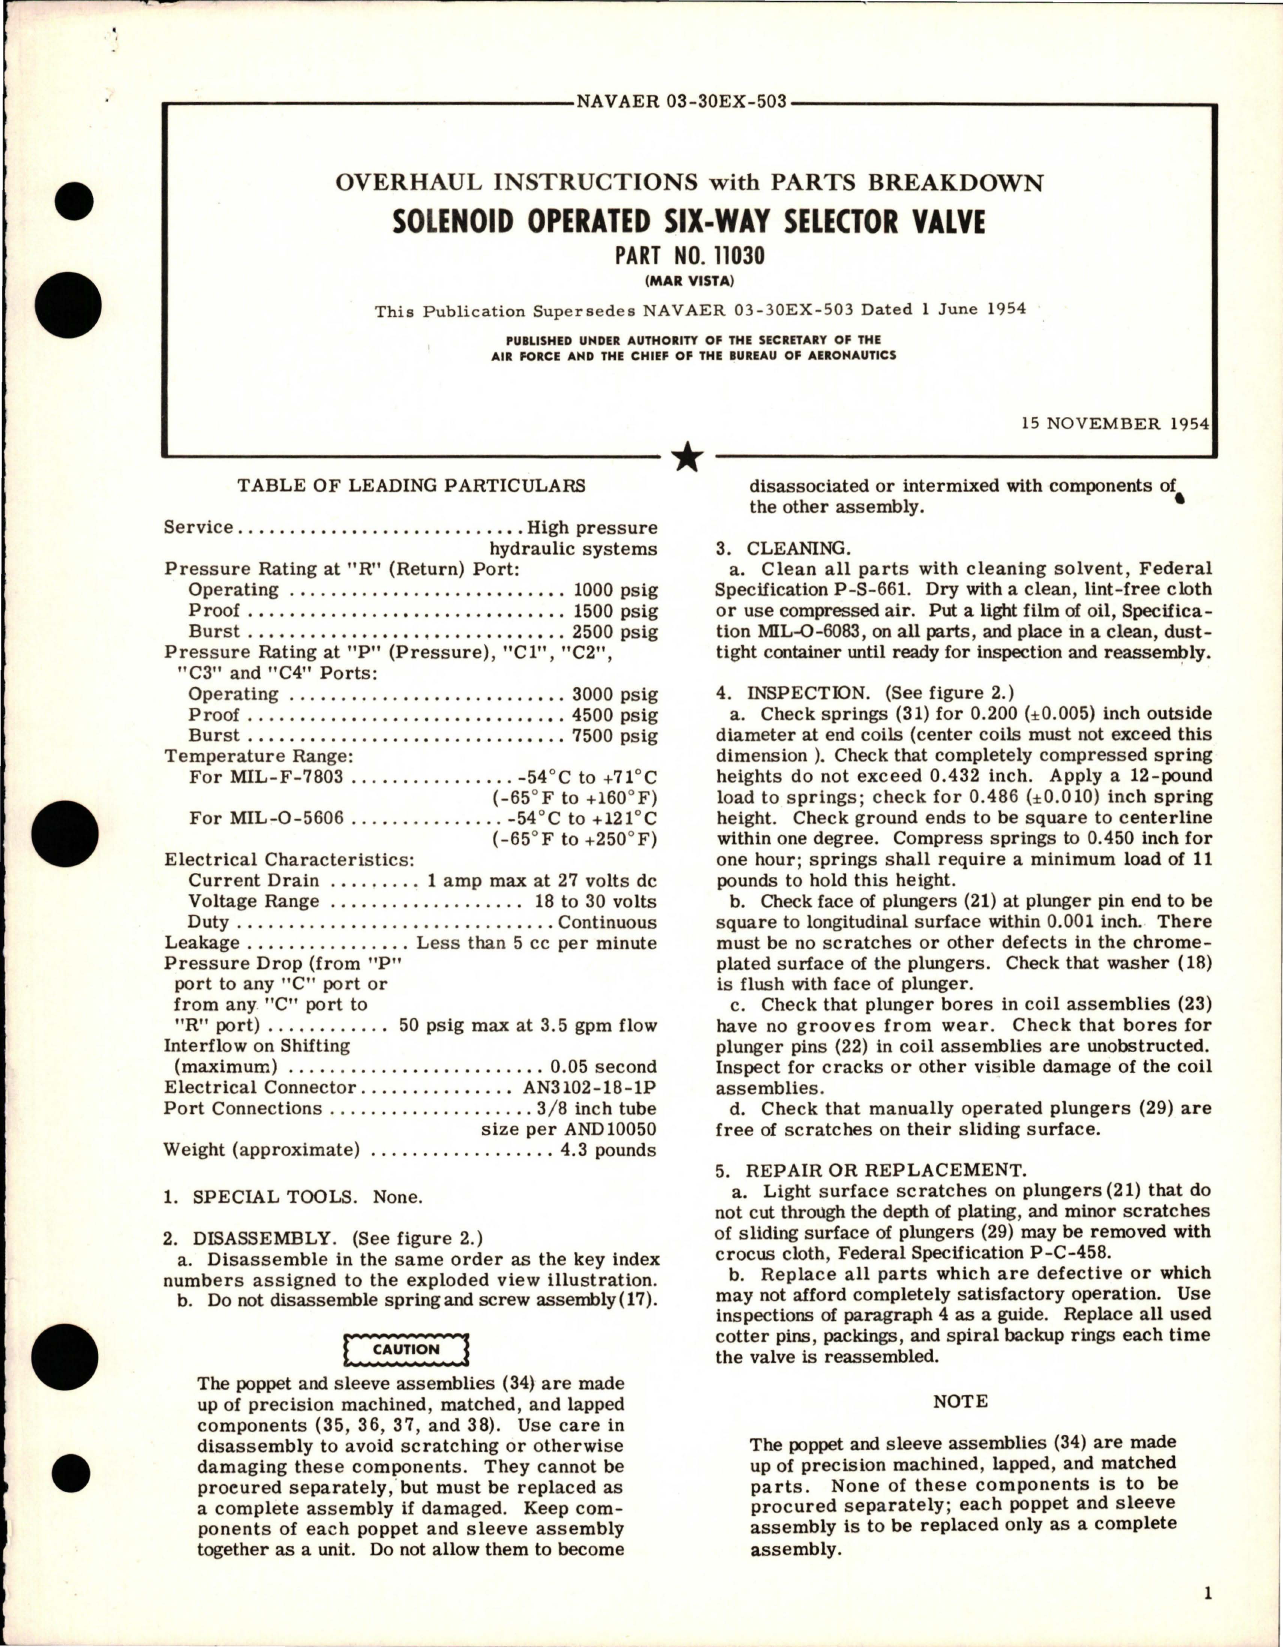 Sample page 1 from AirCorps Library document: Overhaul Instructions with Parts Breakdown for Solenoid Operated Six-Way Selector Valve - Part 11030 